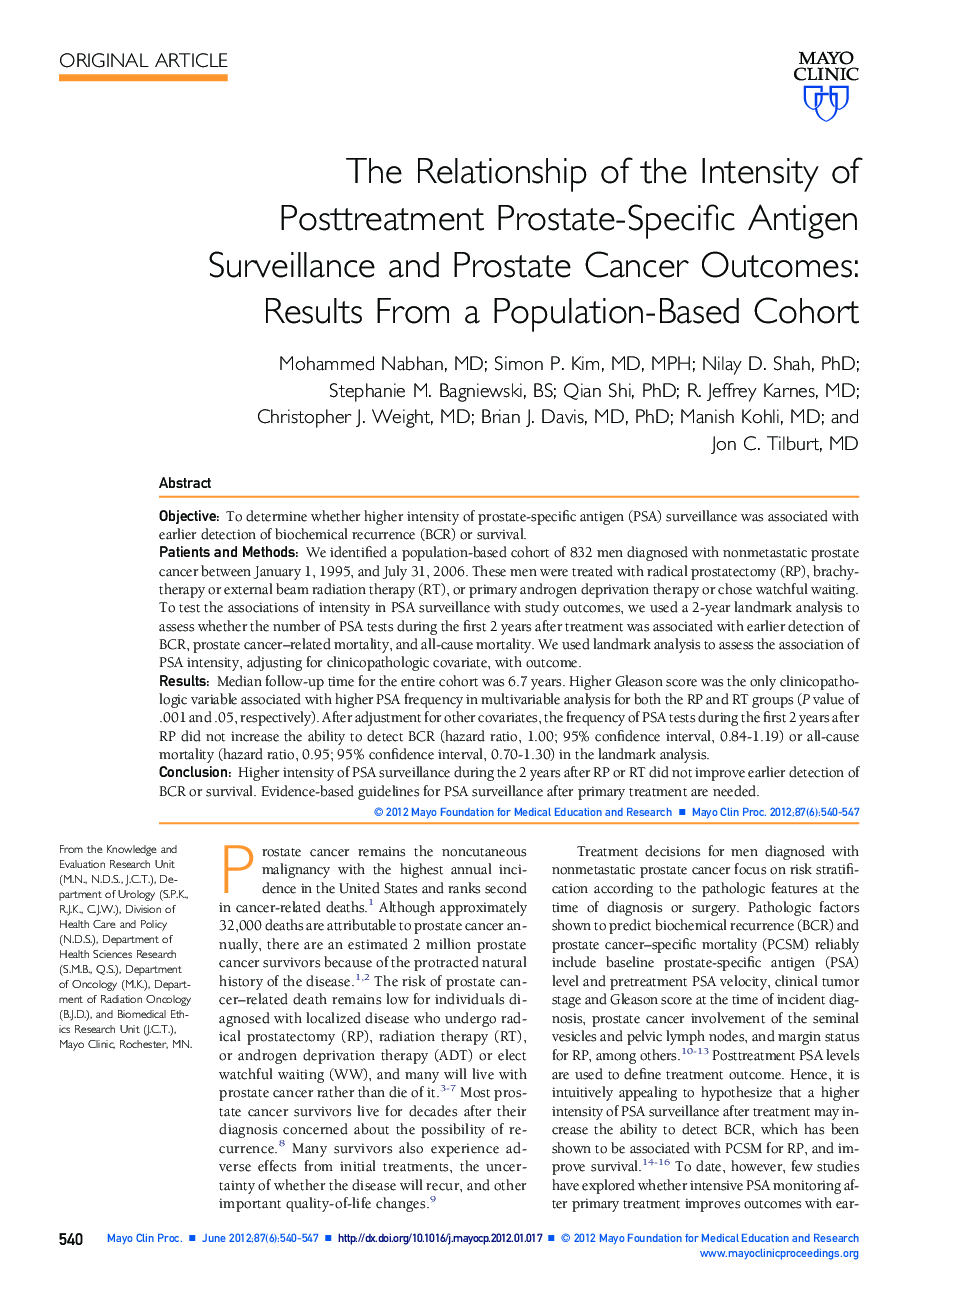 The Relationship of the Intensity of Posttreatment Prostate-Specific Antigen Surveillance and Prostate Cancer Outcomes: Results From a Population-Based Cohort